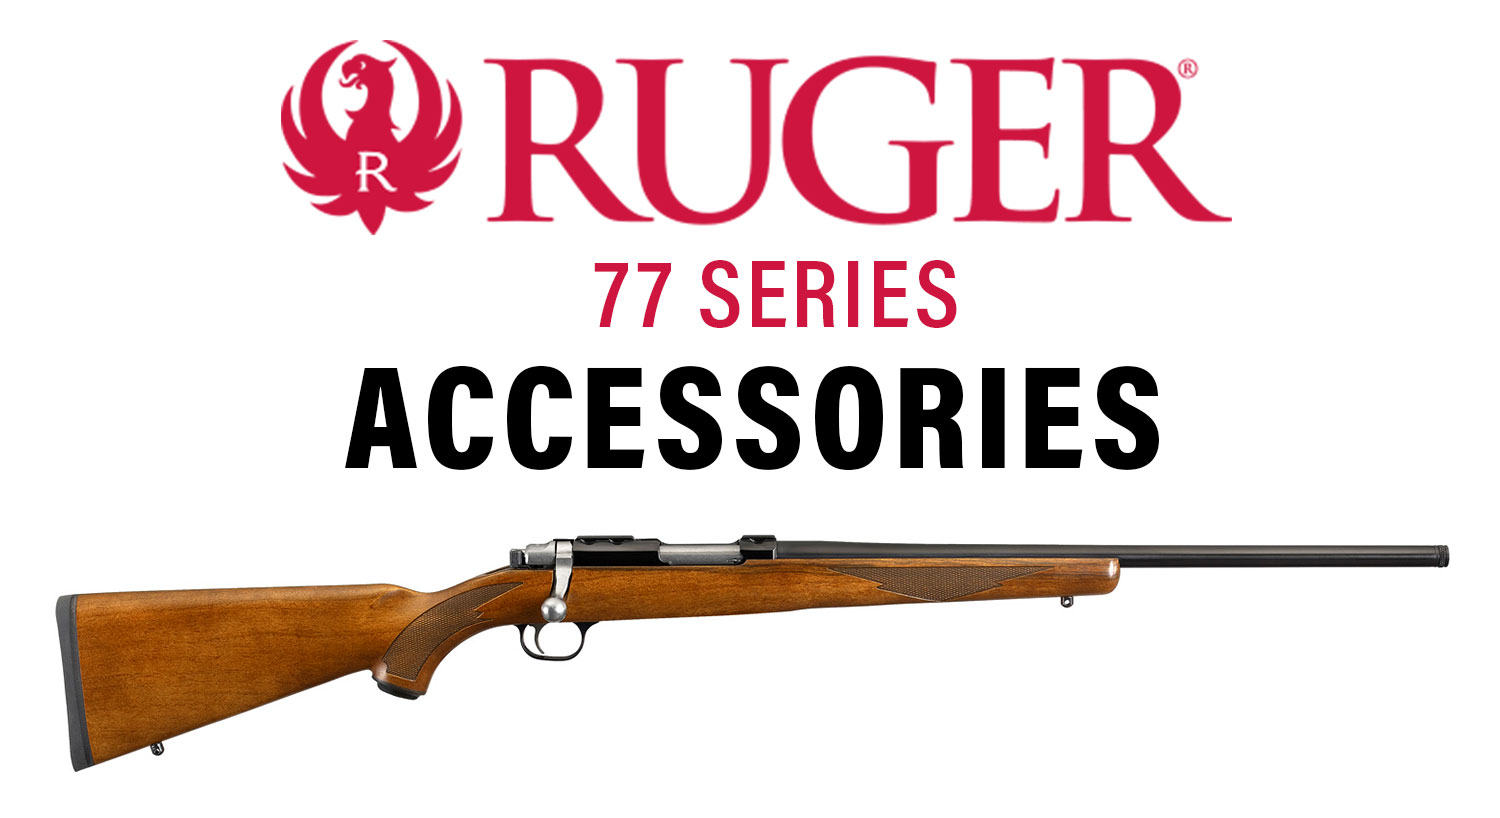 Ruger 77 Series Accessories